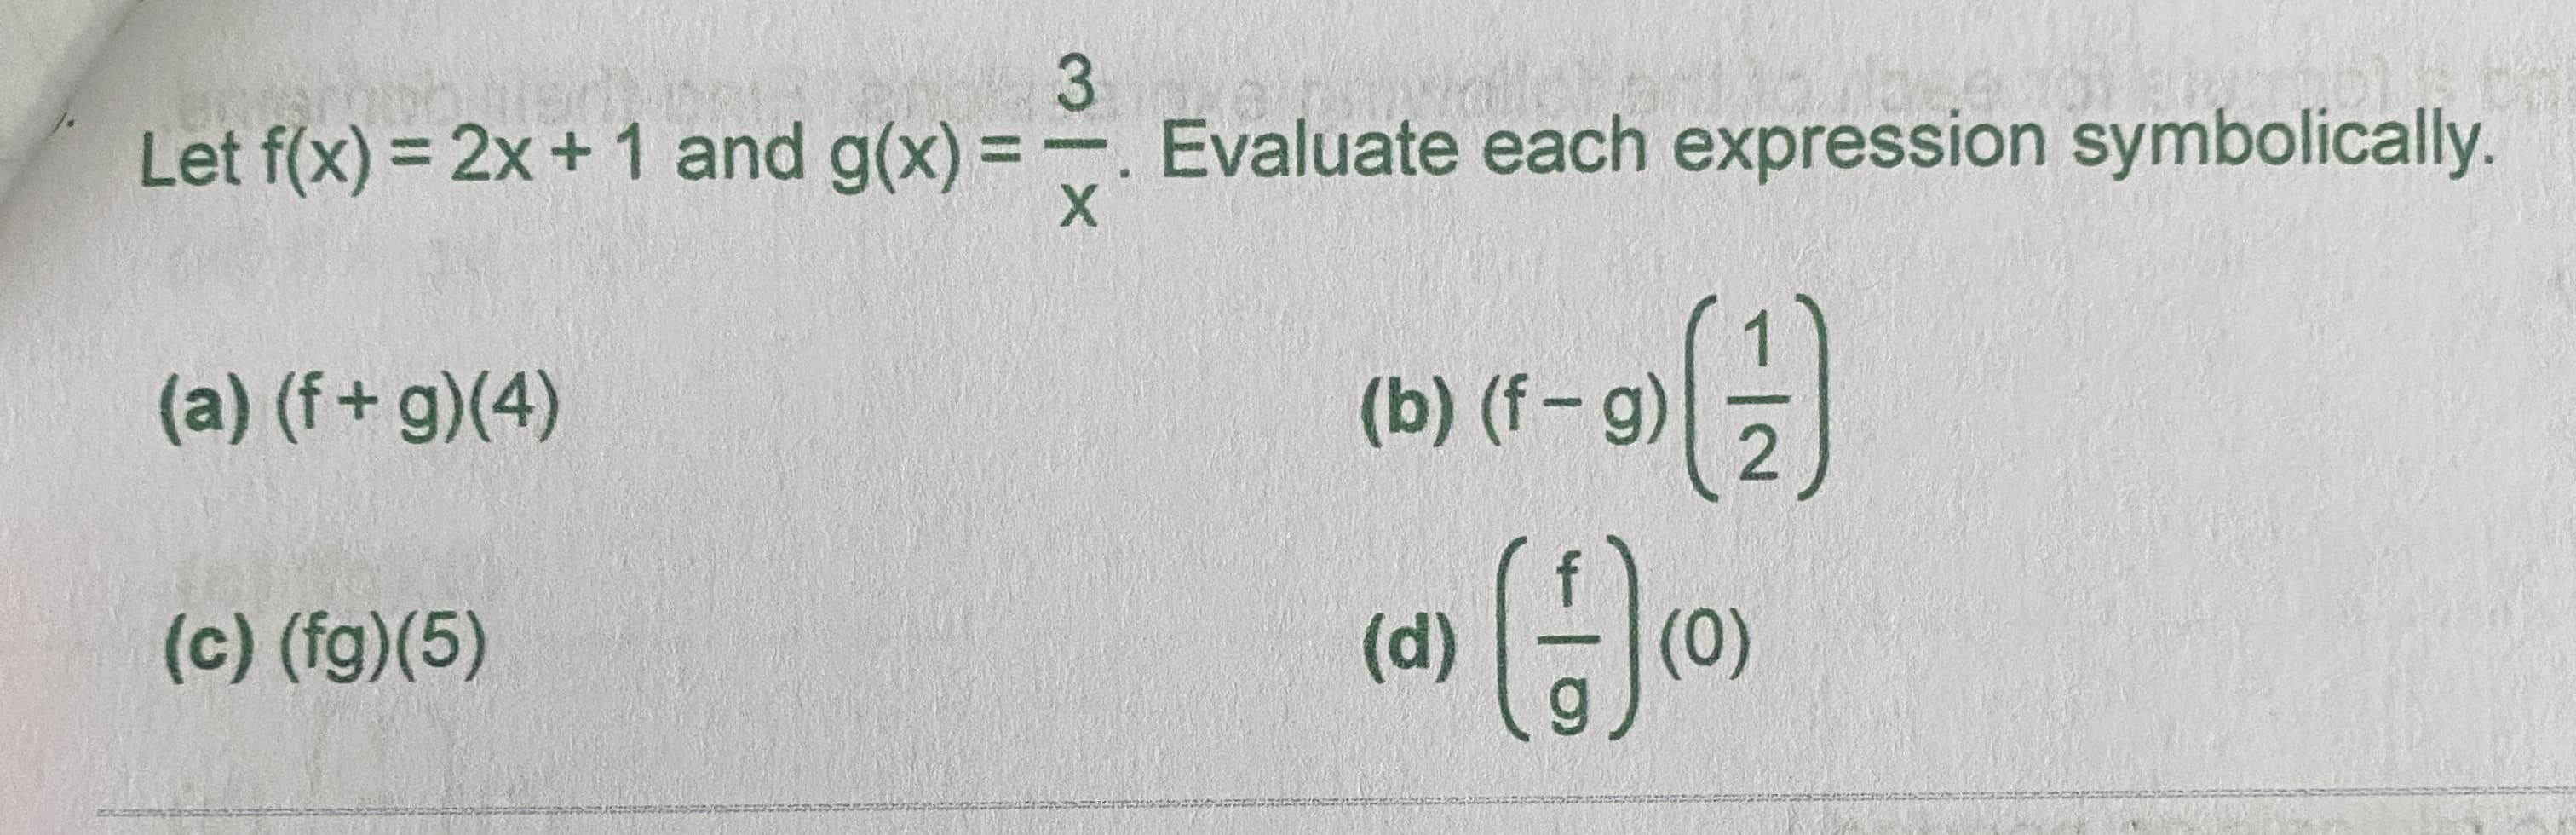 3.
Let f(x) = 2x + 1 and g(x) = Evaluate each expression symbolically.
%3D
(a) (f+ g)(4)
(b) (f-g)
2.
(c) (fg)(5)
(d)
(0)
